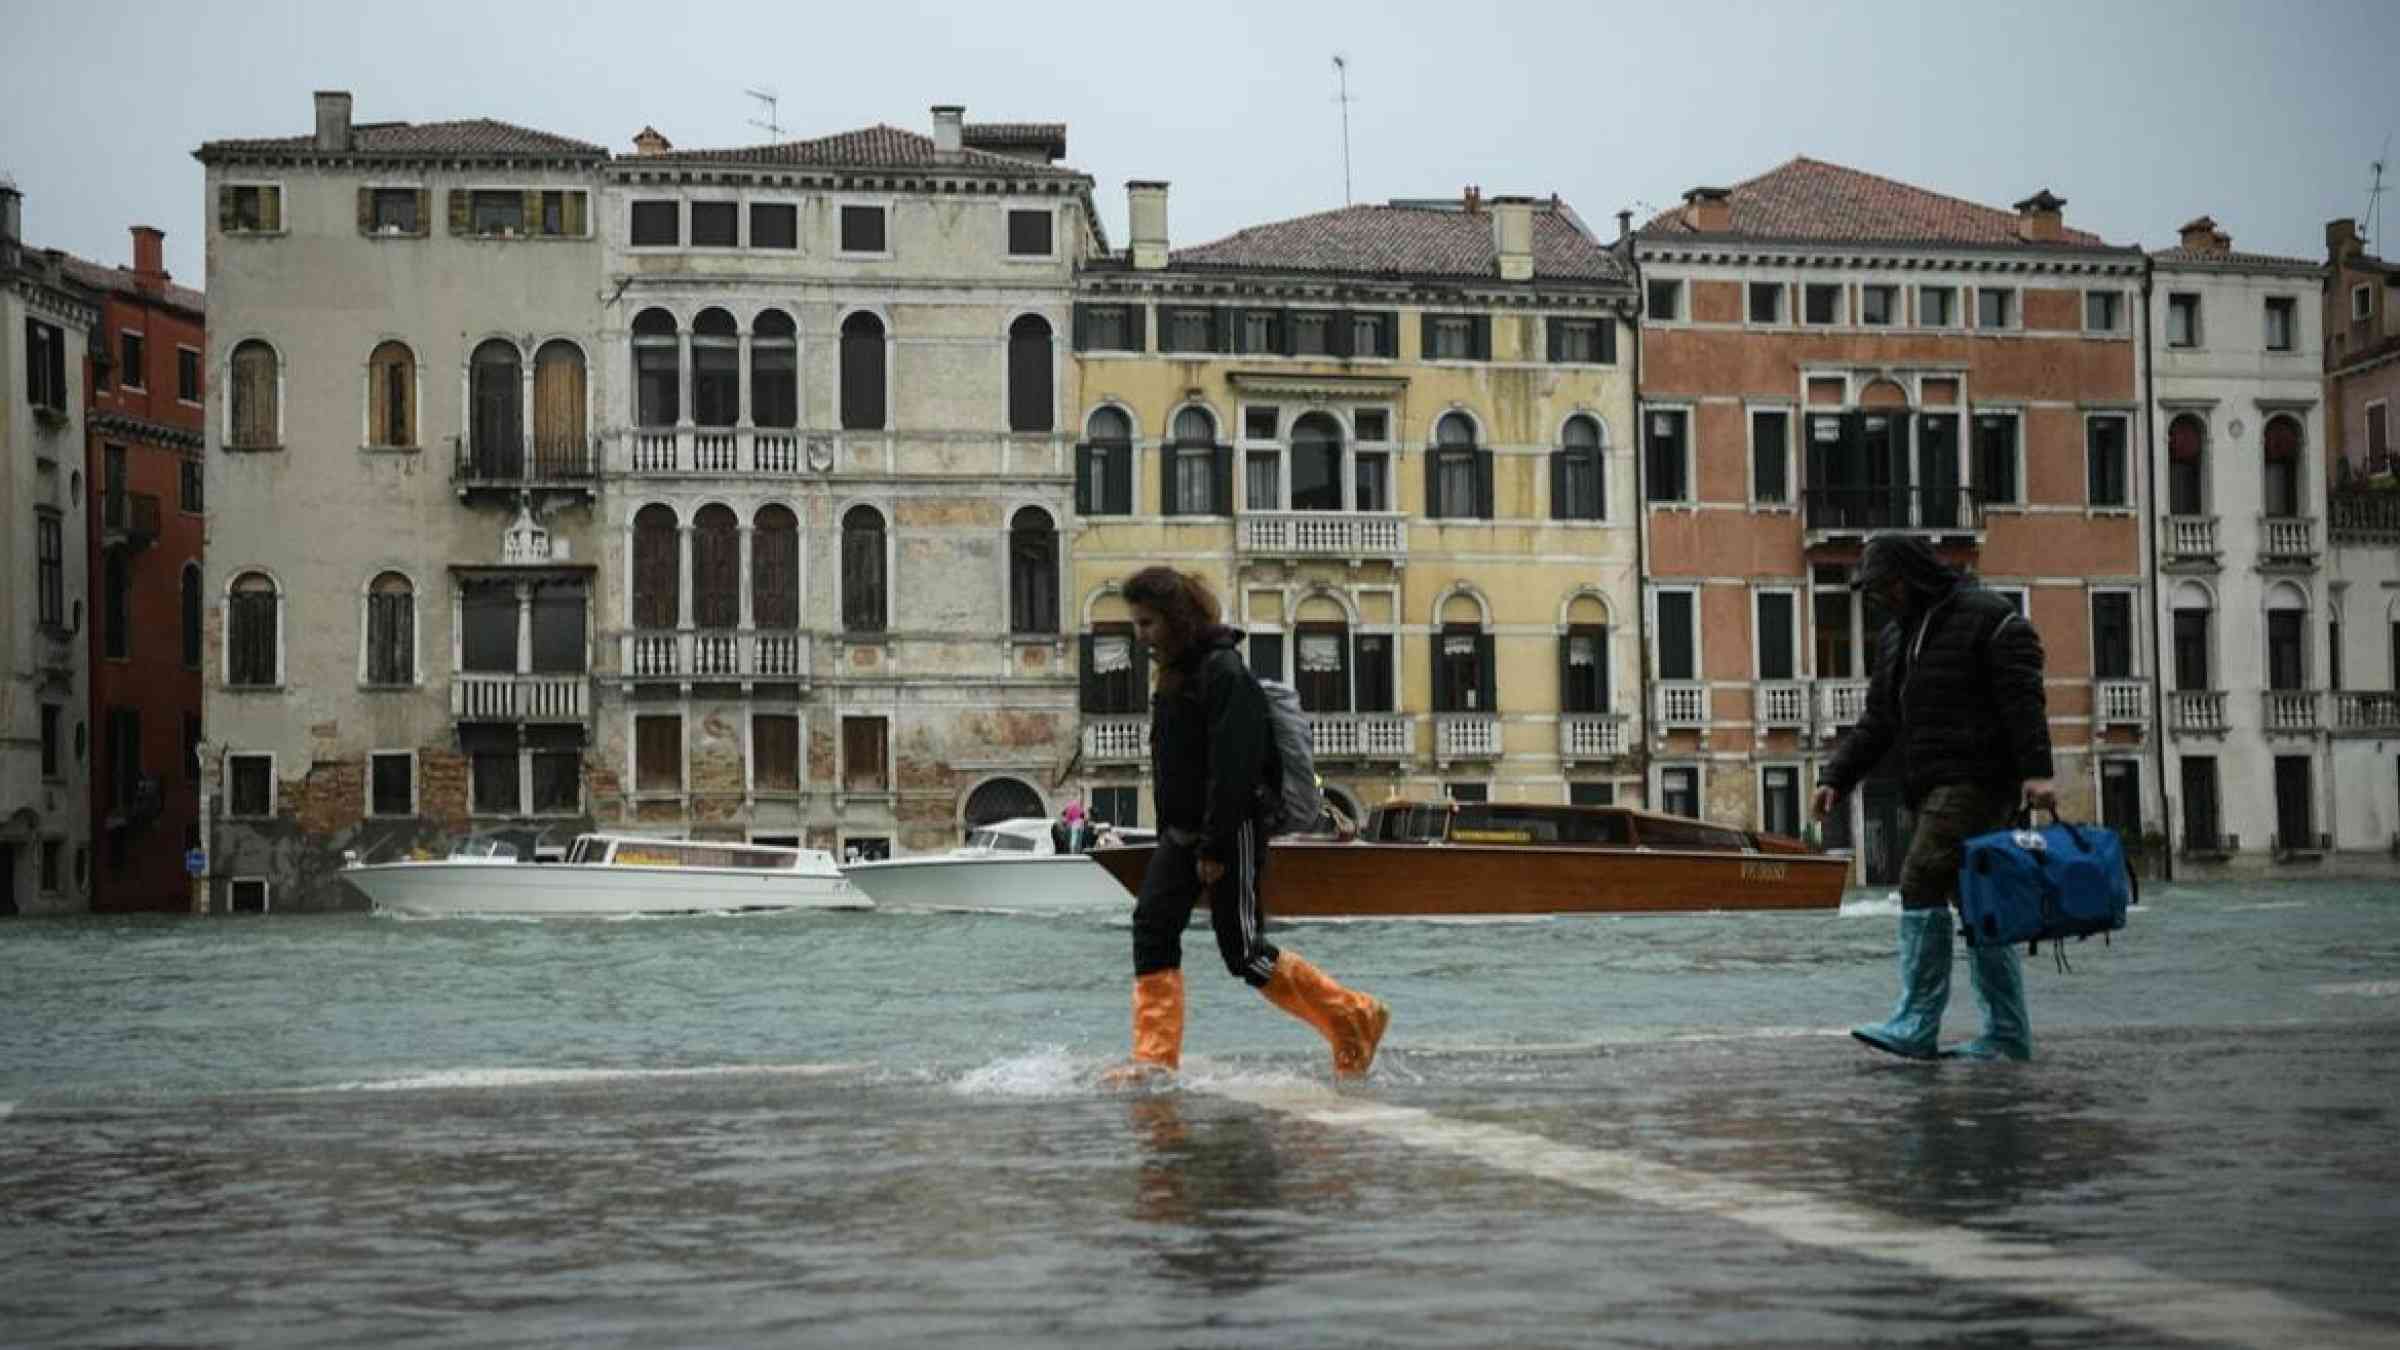 Pedestrians traverse the inundated streets of Venice, Italy